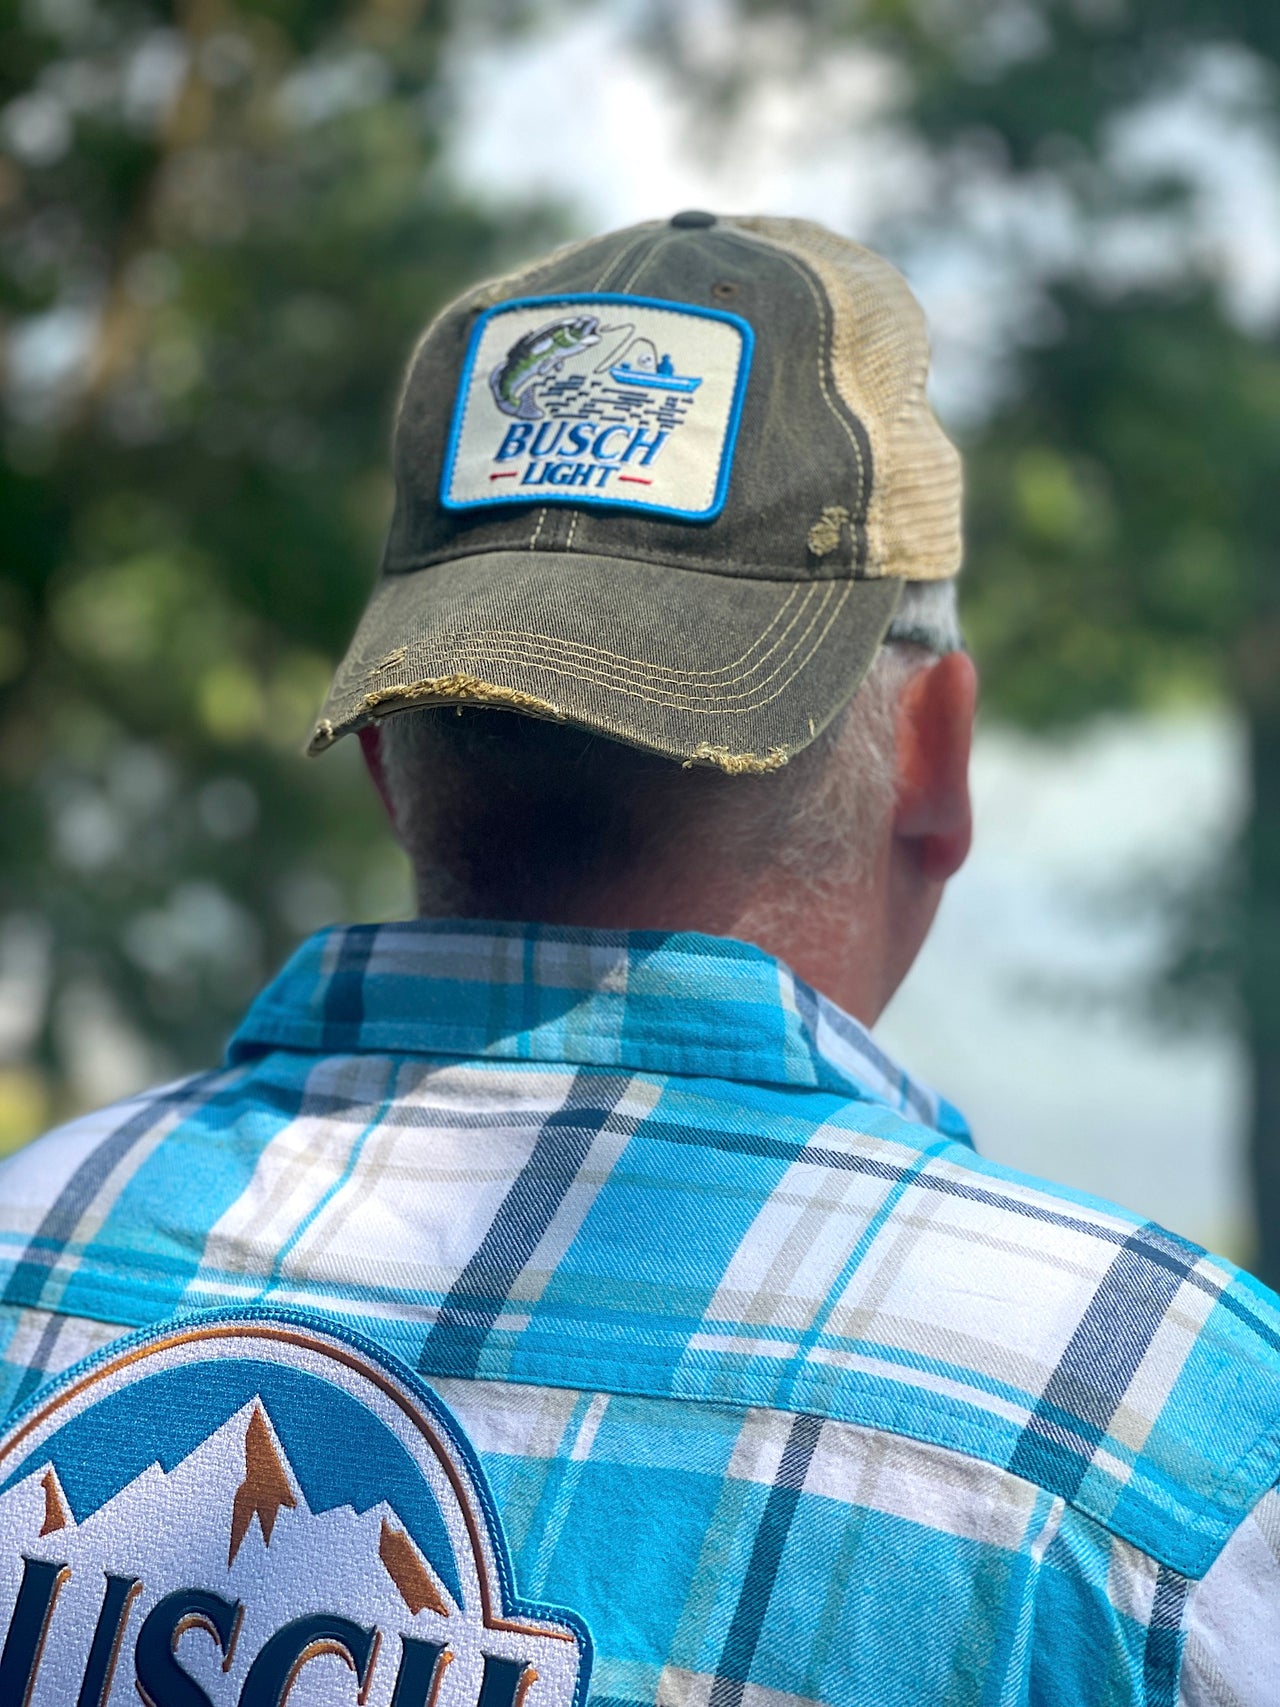 Busch Light Fishing Hats at Angry Minnow Vintage